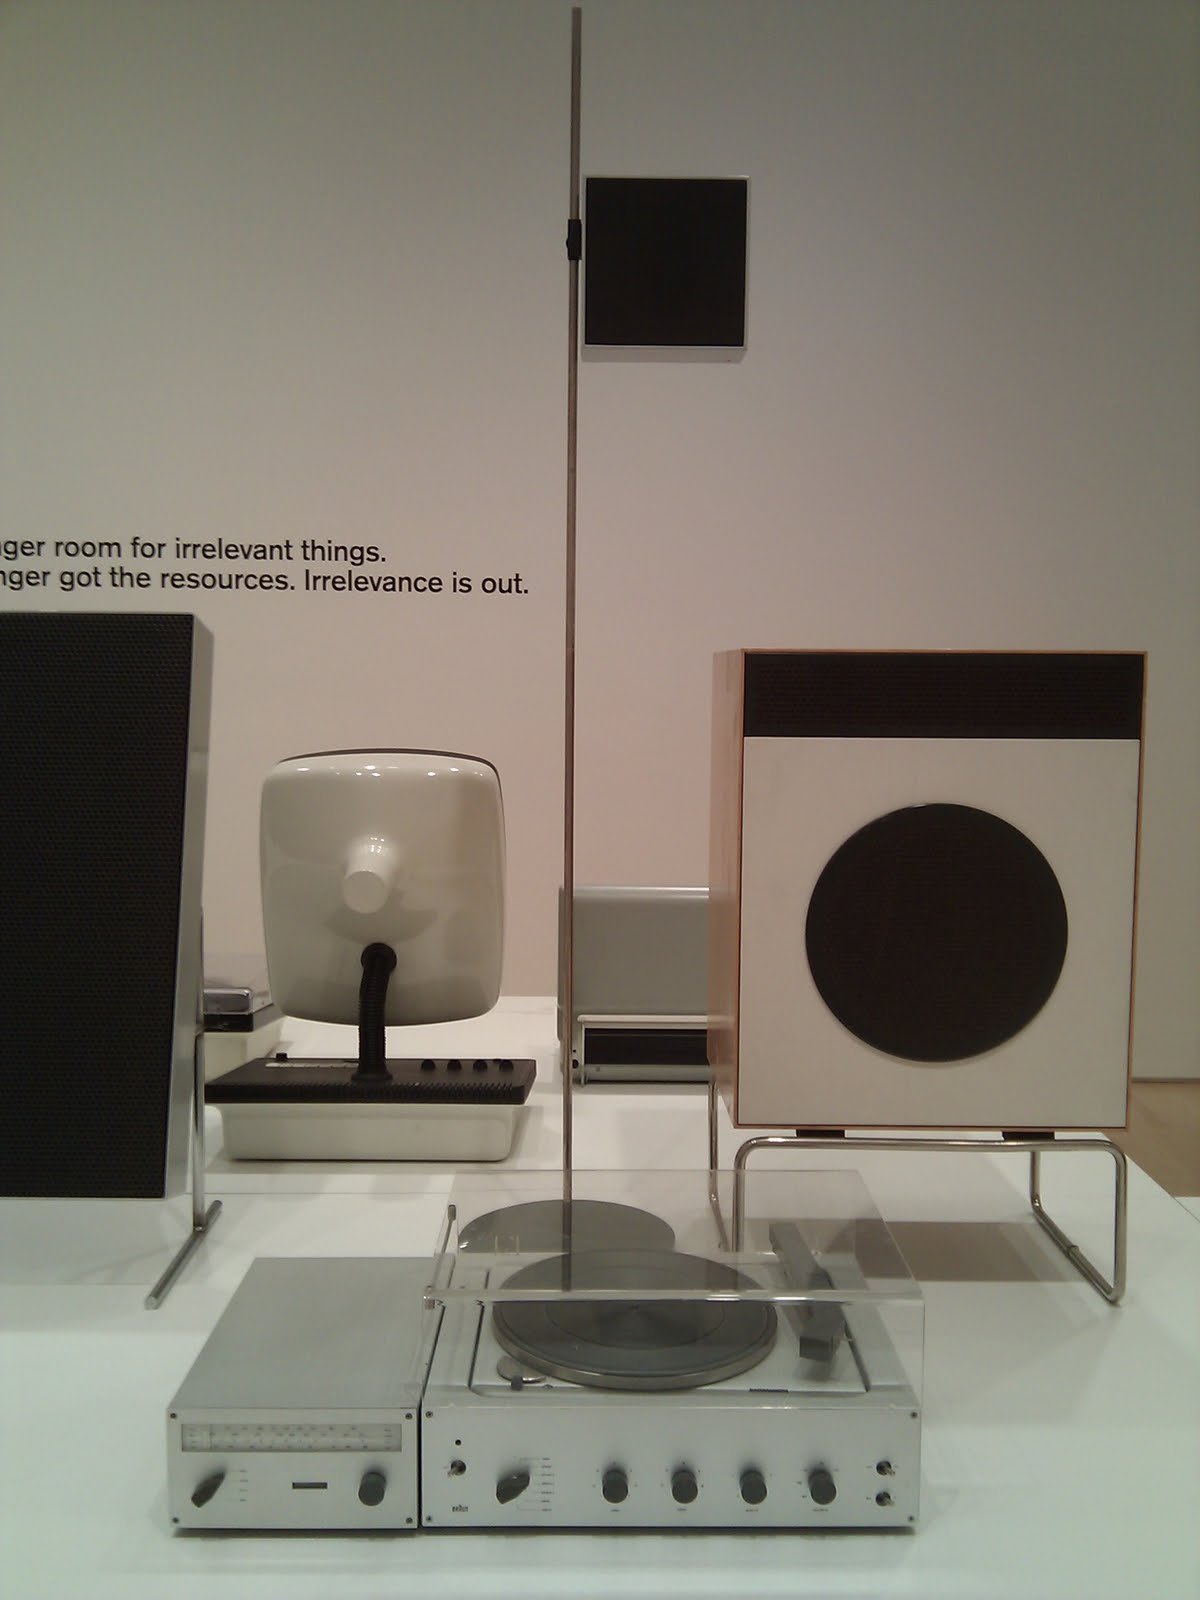 The Braun microwave, designed by Dieter Rams, is the, Stable Diffusion